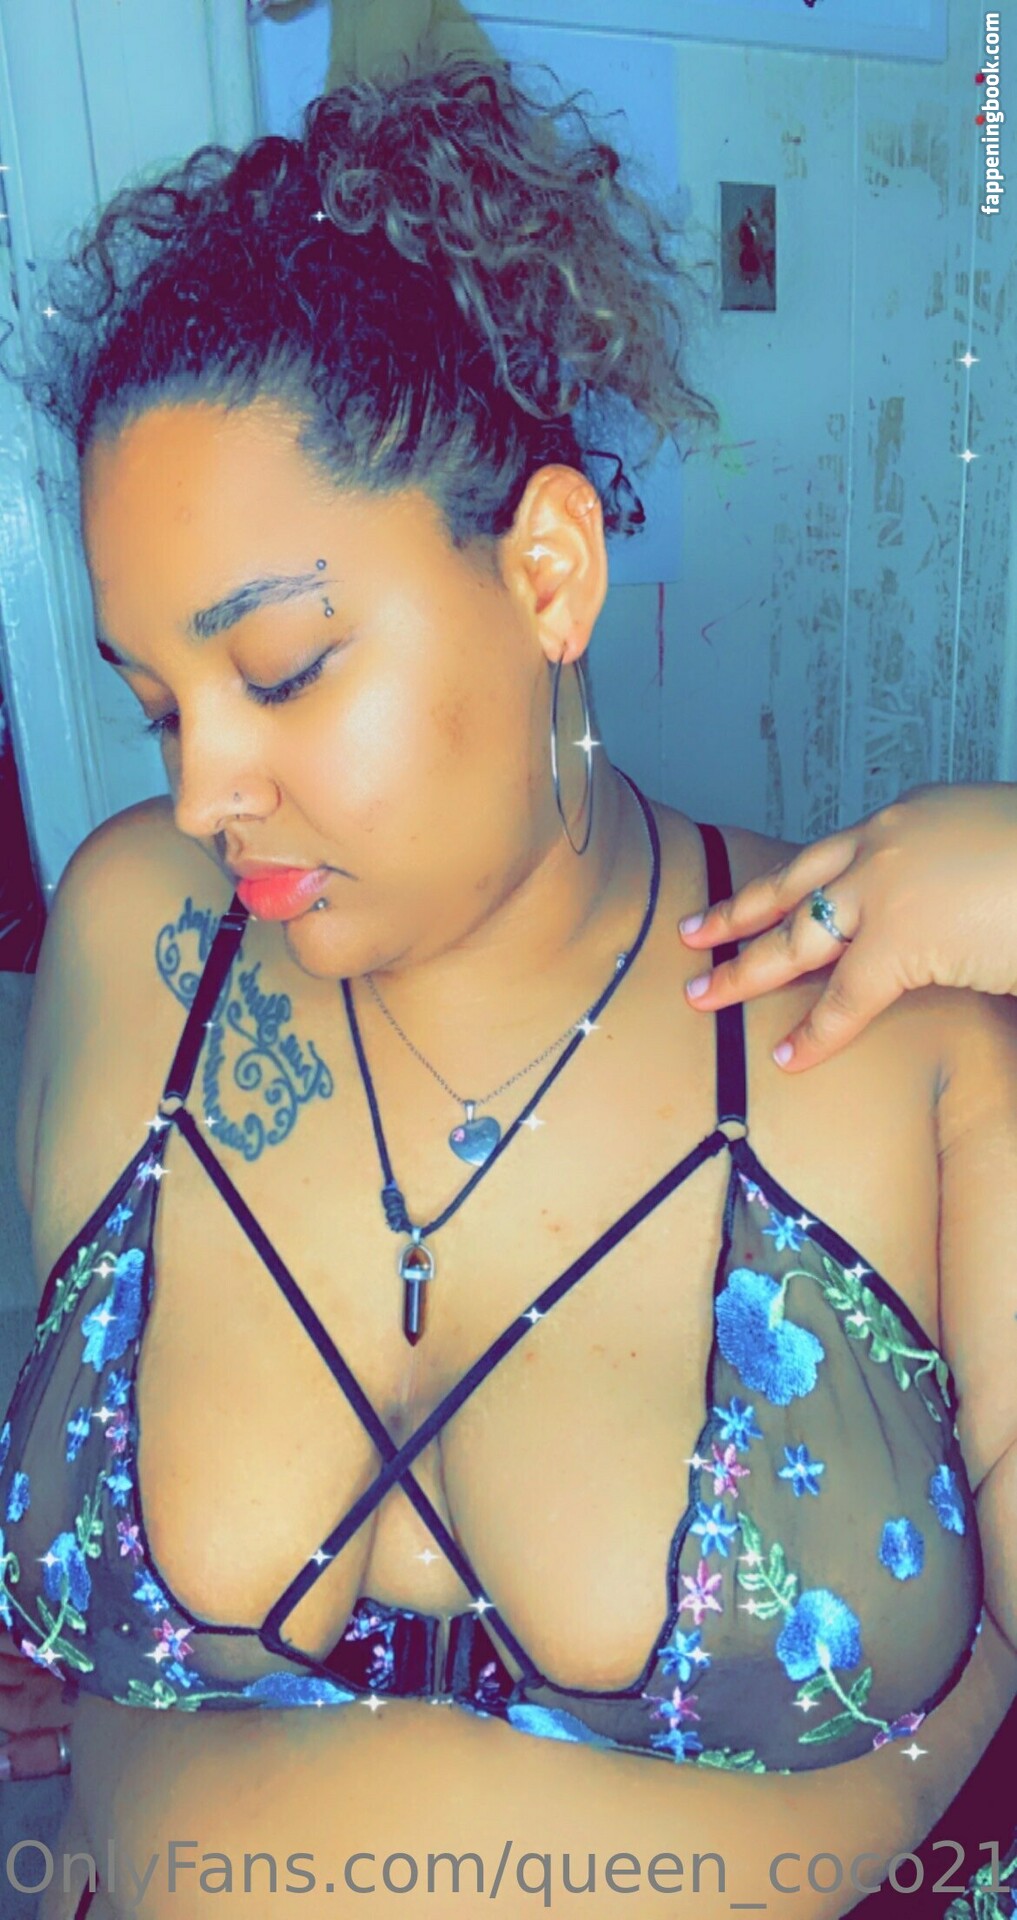 queen_coco21 Nude OnlyFans Leaks